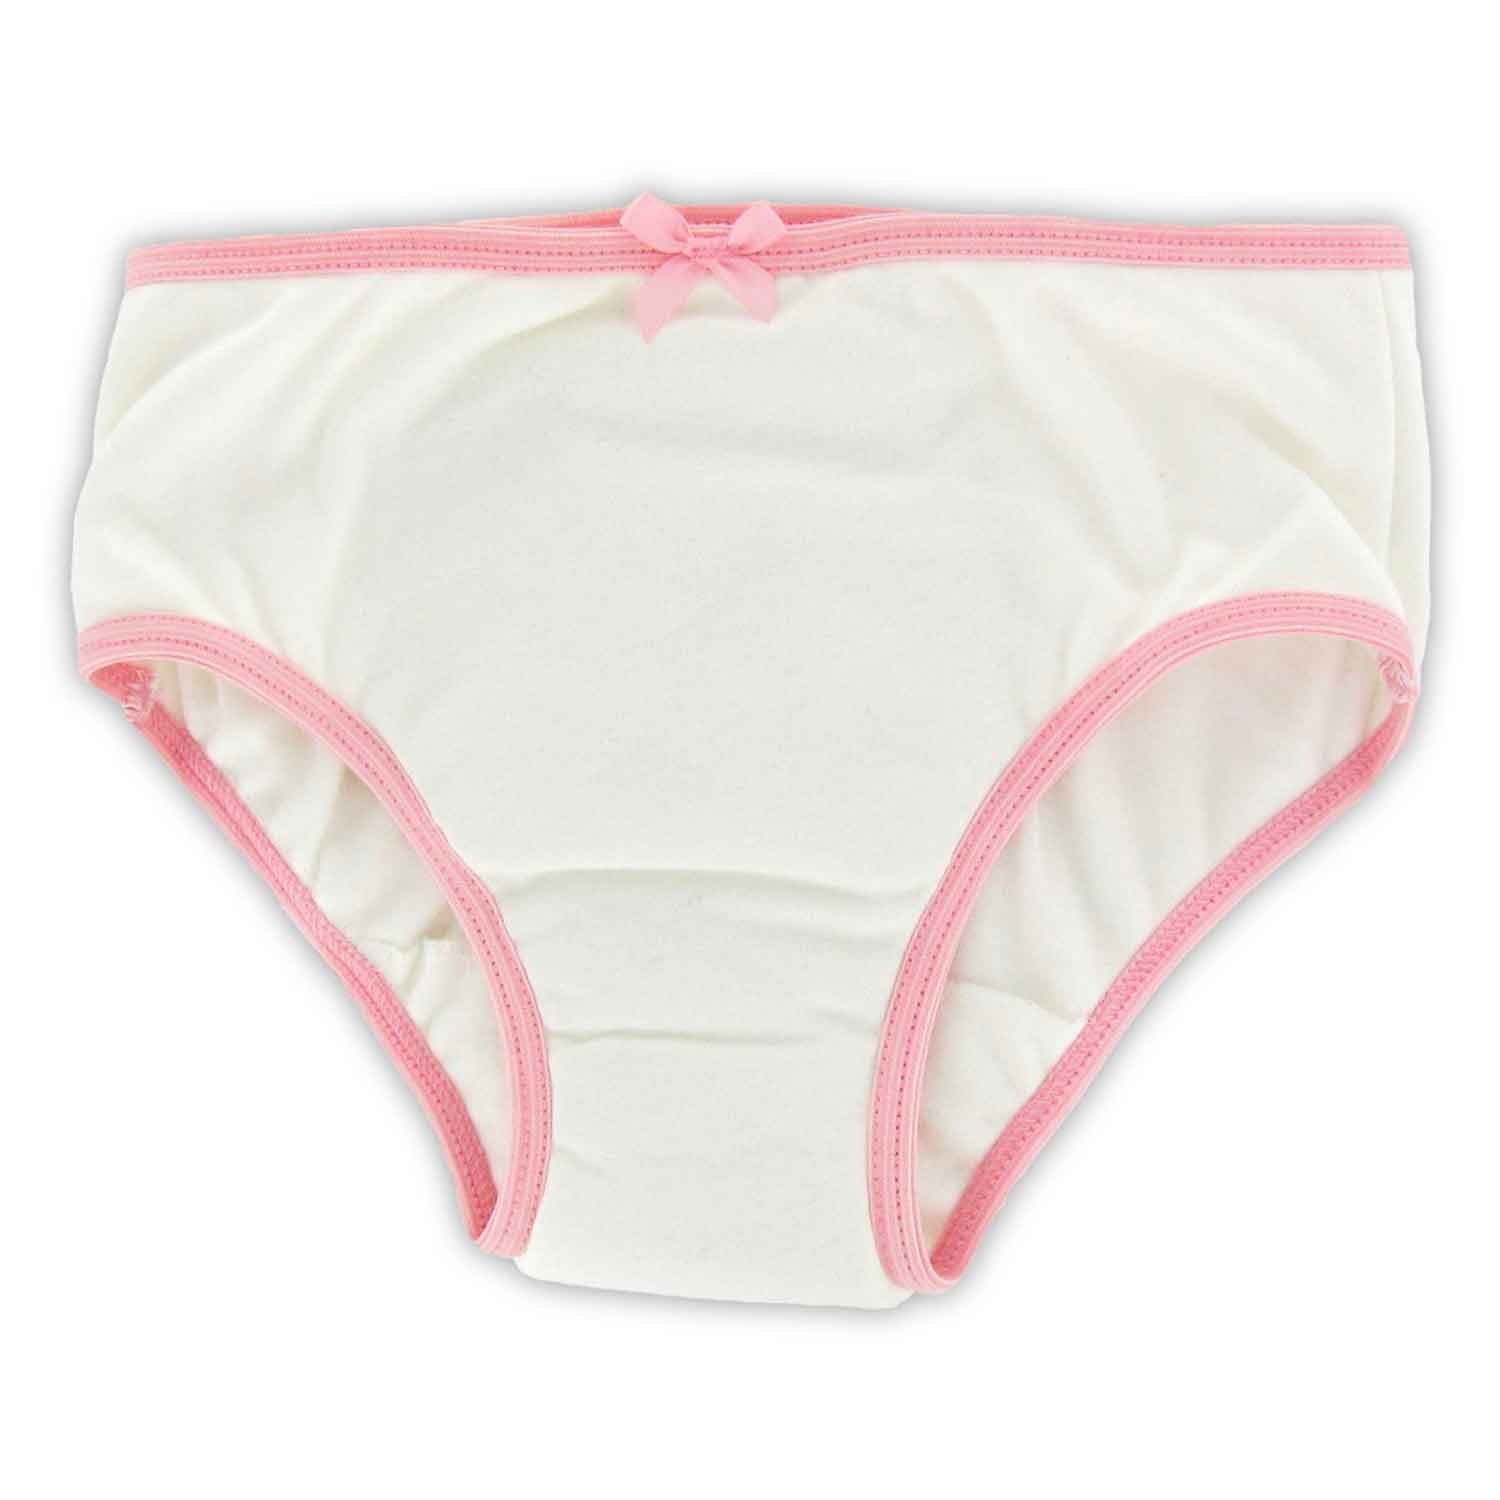 Urinary Incontinence Cotton Underwear for Women, Washable